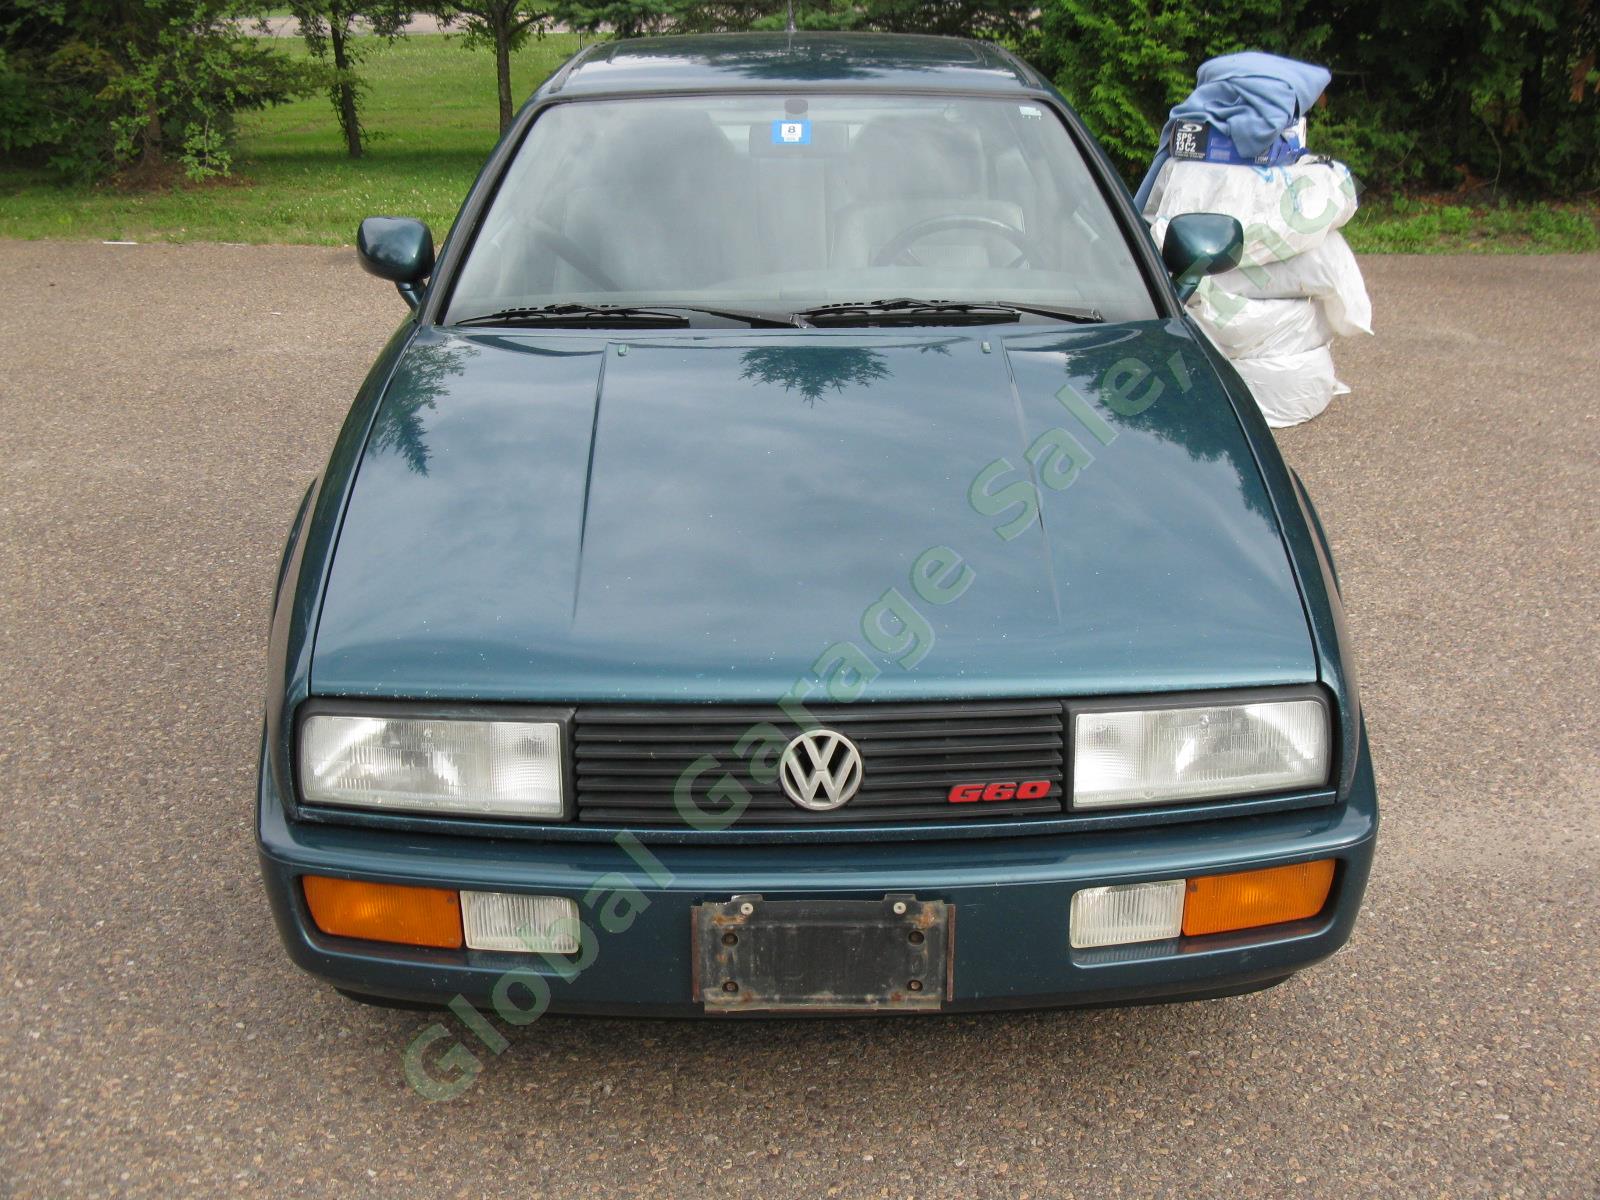 1992 VW Volkswagen Corrado G60 Supercharged 158hp 1.8L 5-Spd One Owner LOW PRICE 2